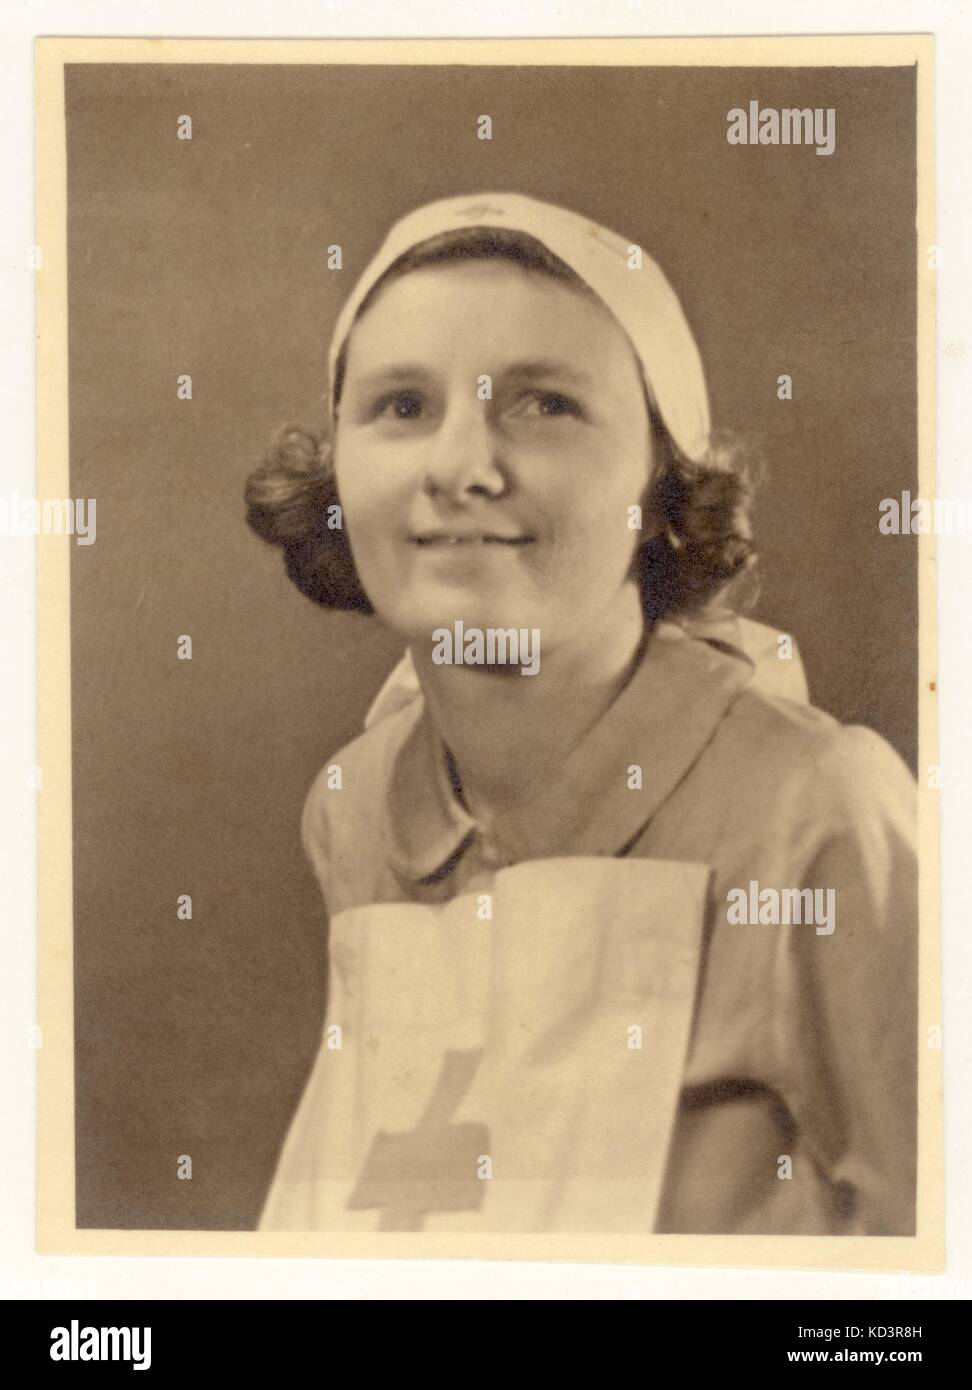 Portrait photograph of a caring young Red Cross nurse wearing a Voluntary Aid Detachment (VAD) uniform circa 1940, U.K. Stock Photo